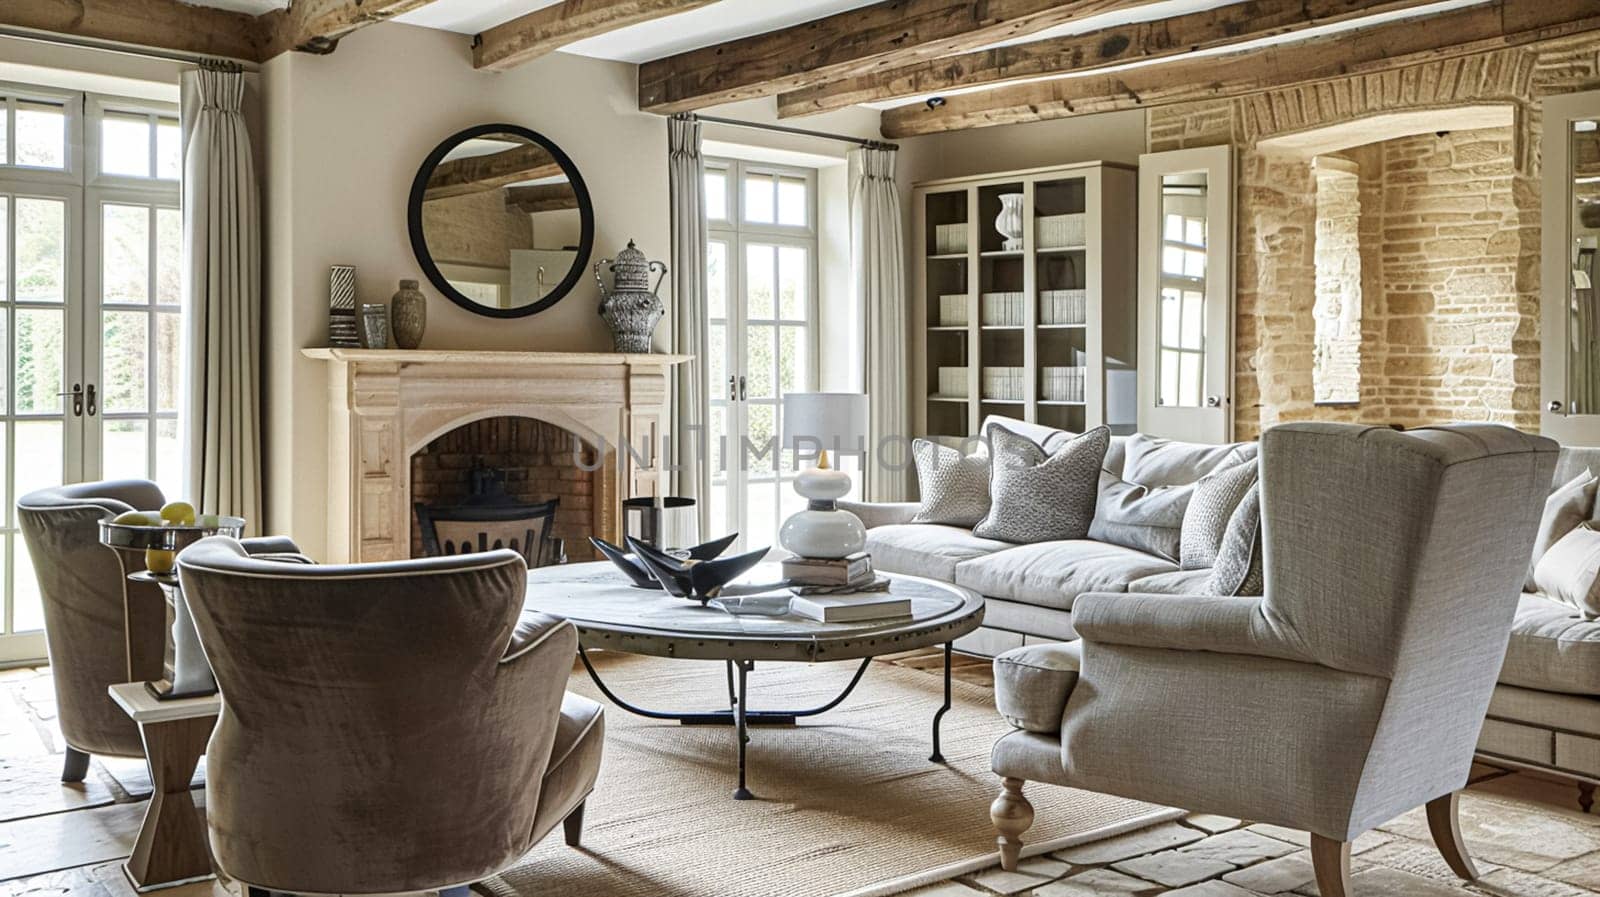 Cotswolds cottage style sitting room, living room interior design and country house home decor, sofa and lounge furniture, English countryside style